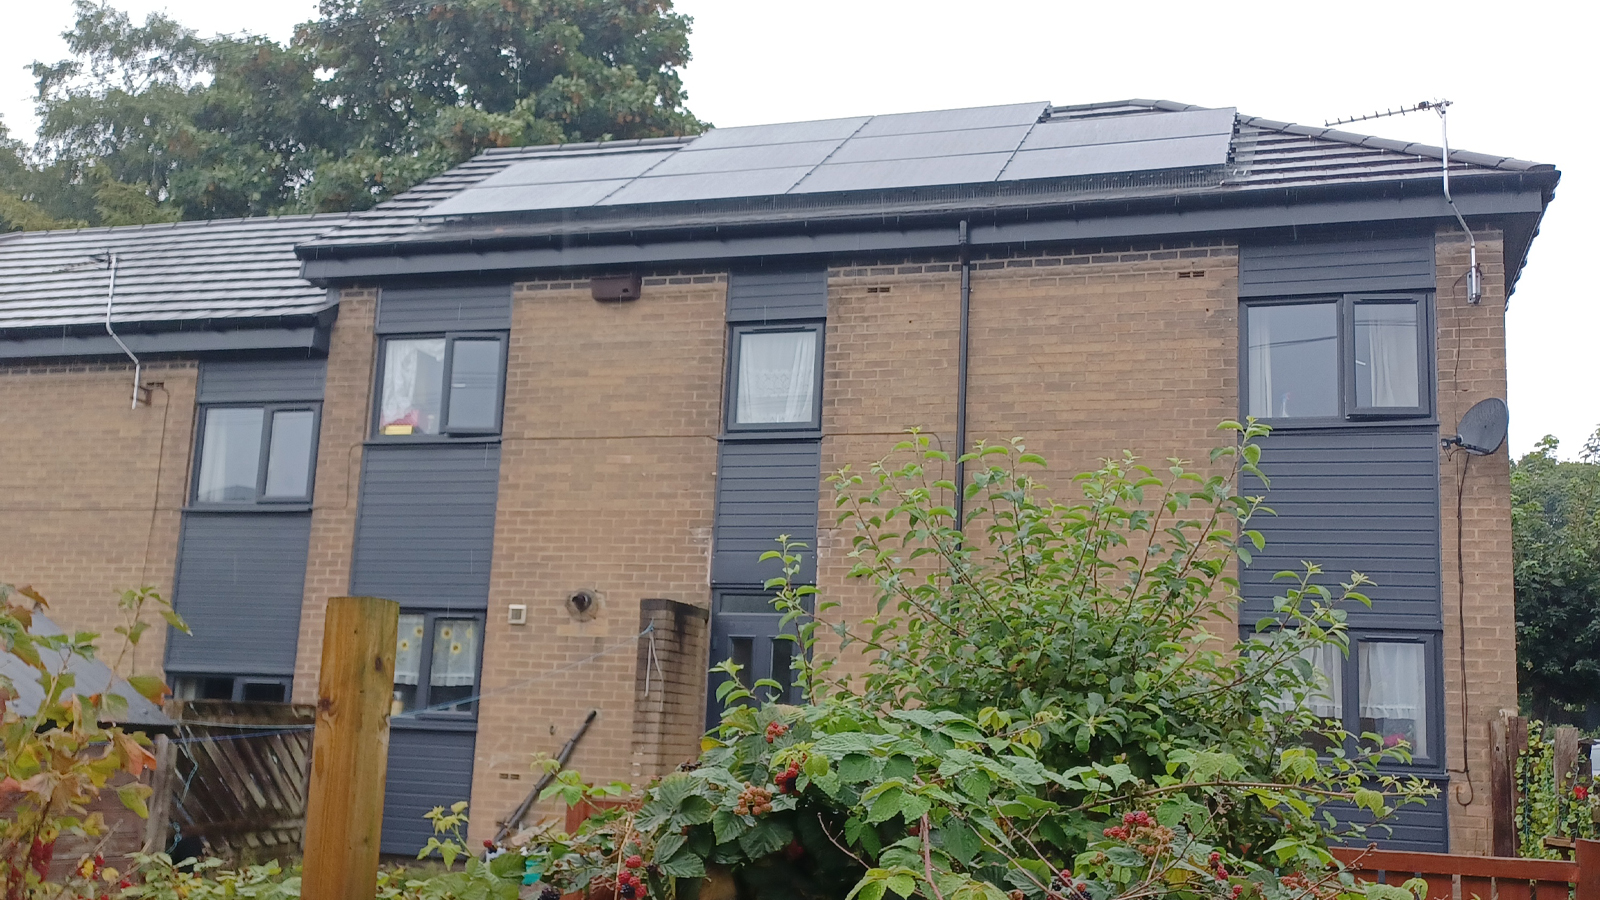 A completed property on Beech Hill scheme, with solar panels